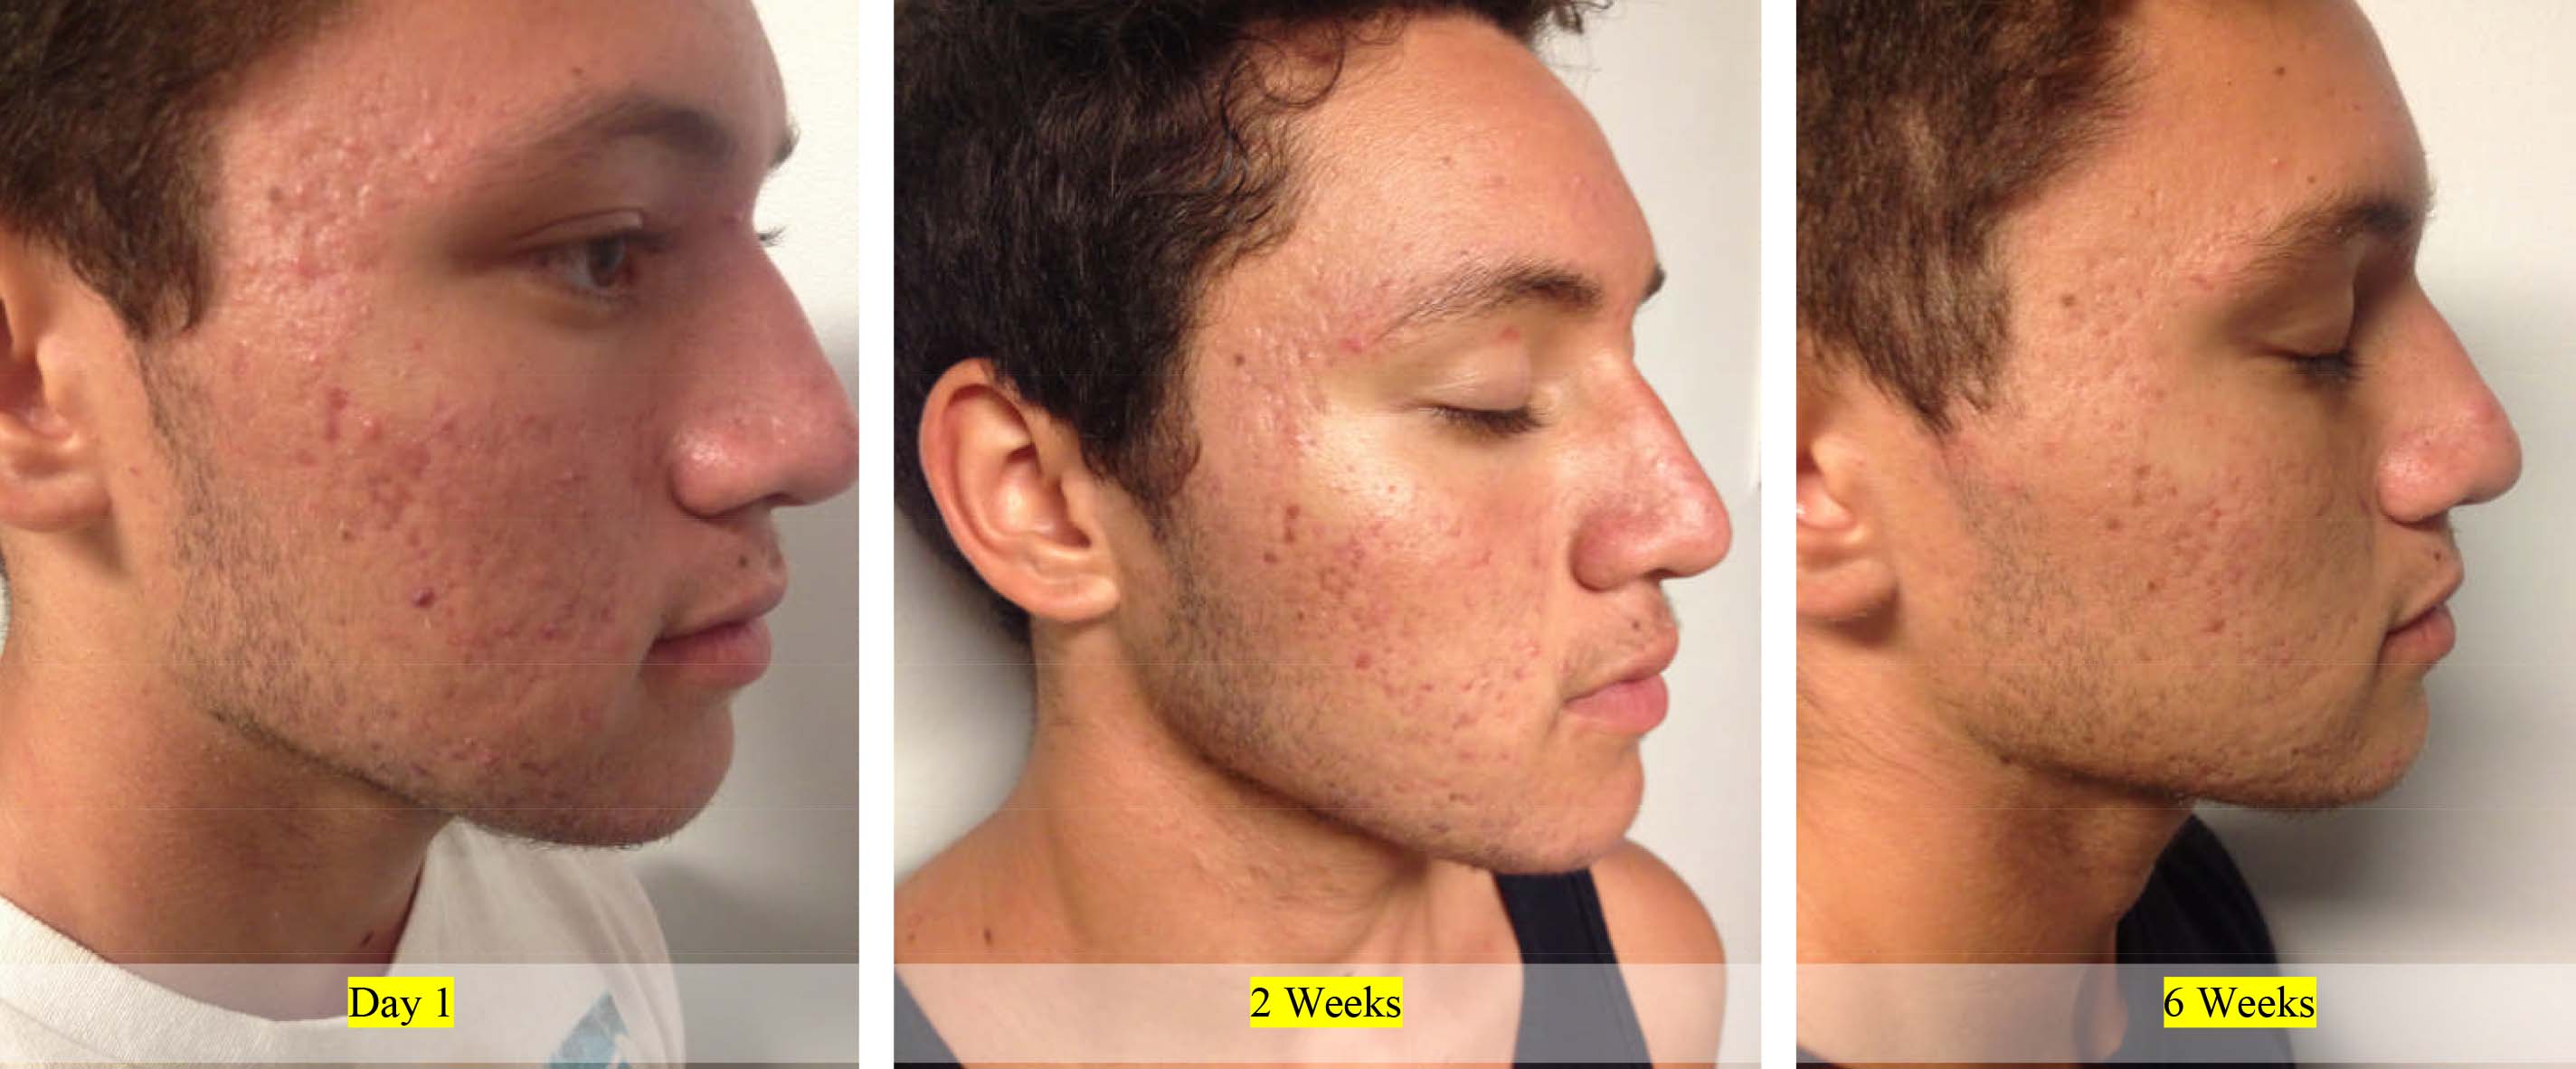 Acne Control Before and After 